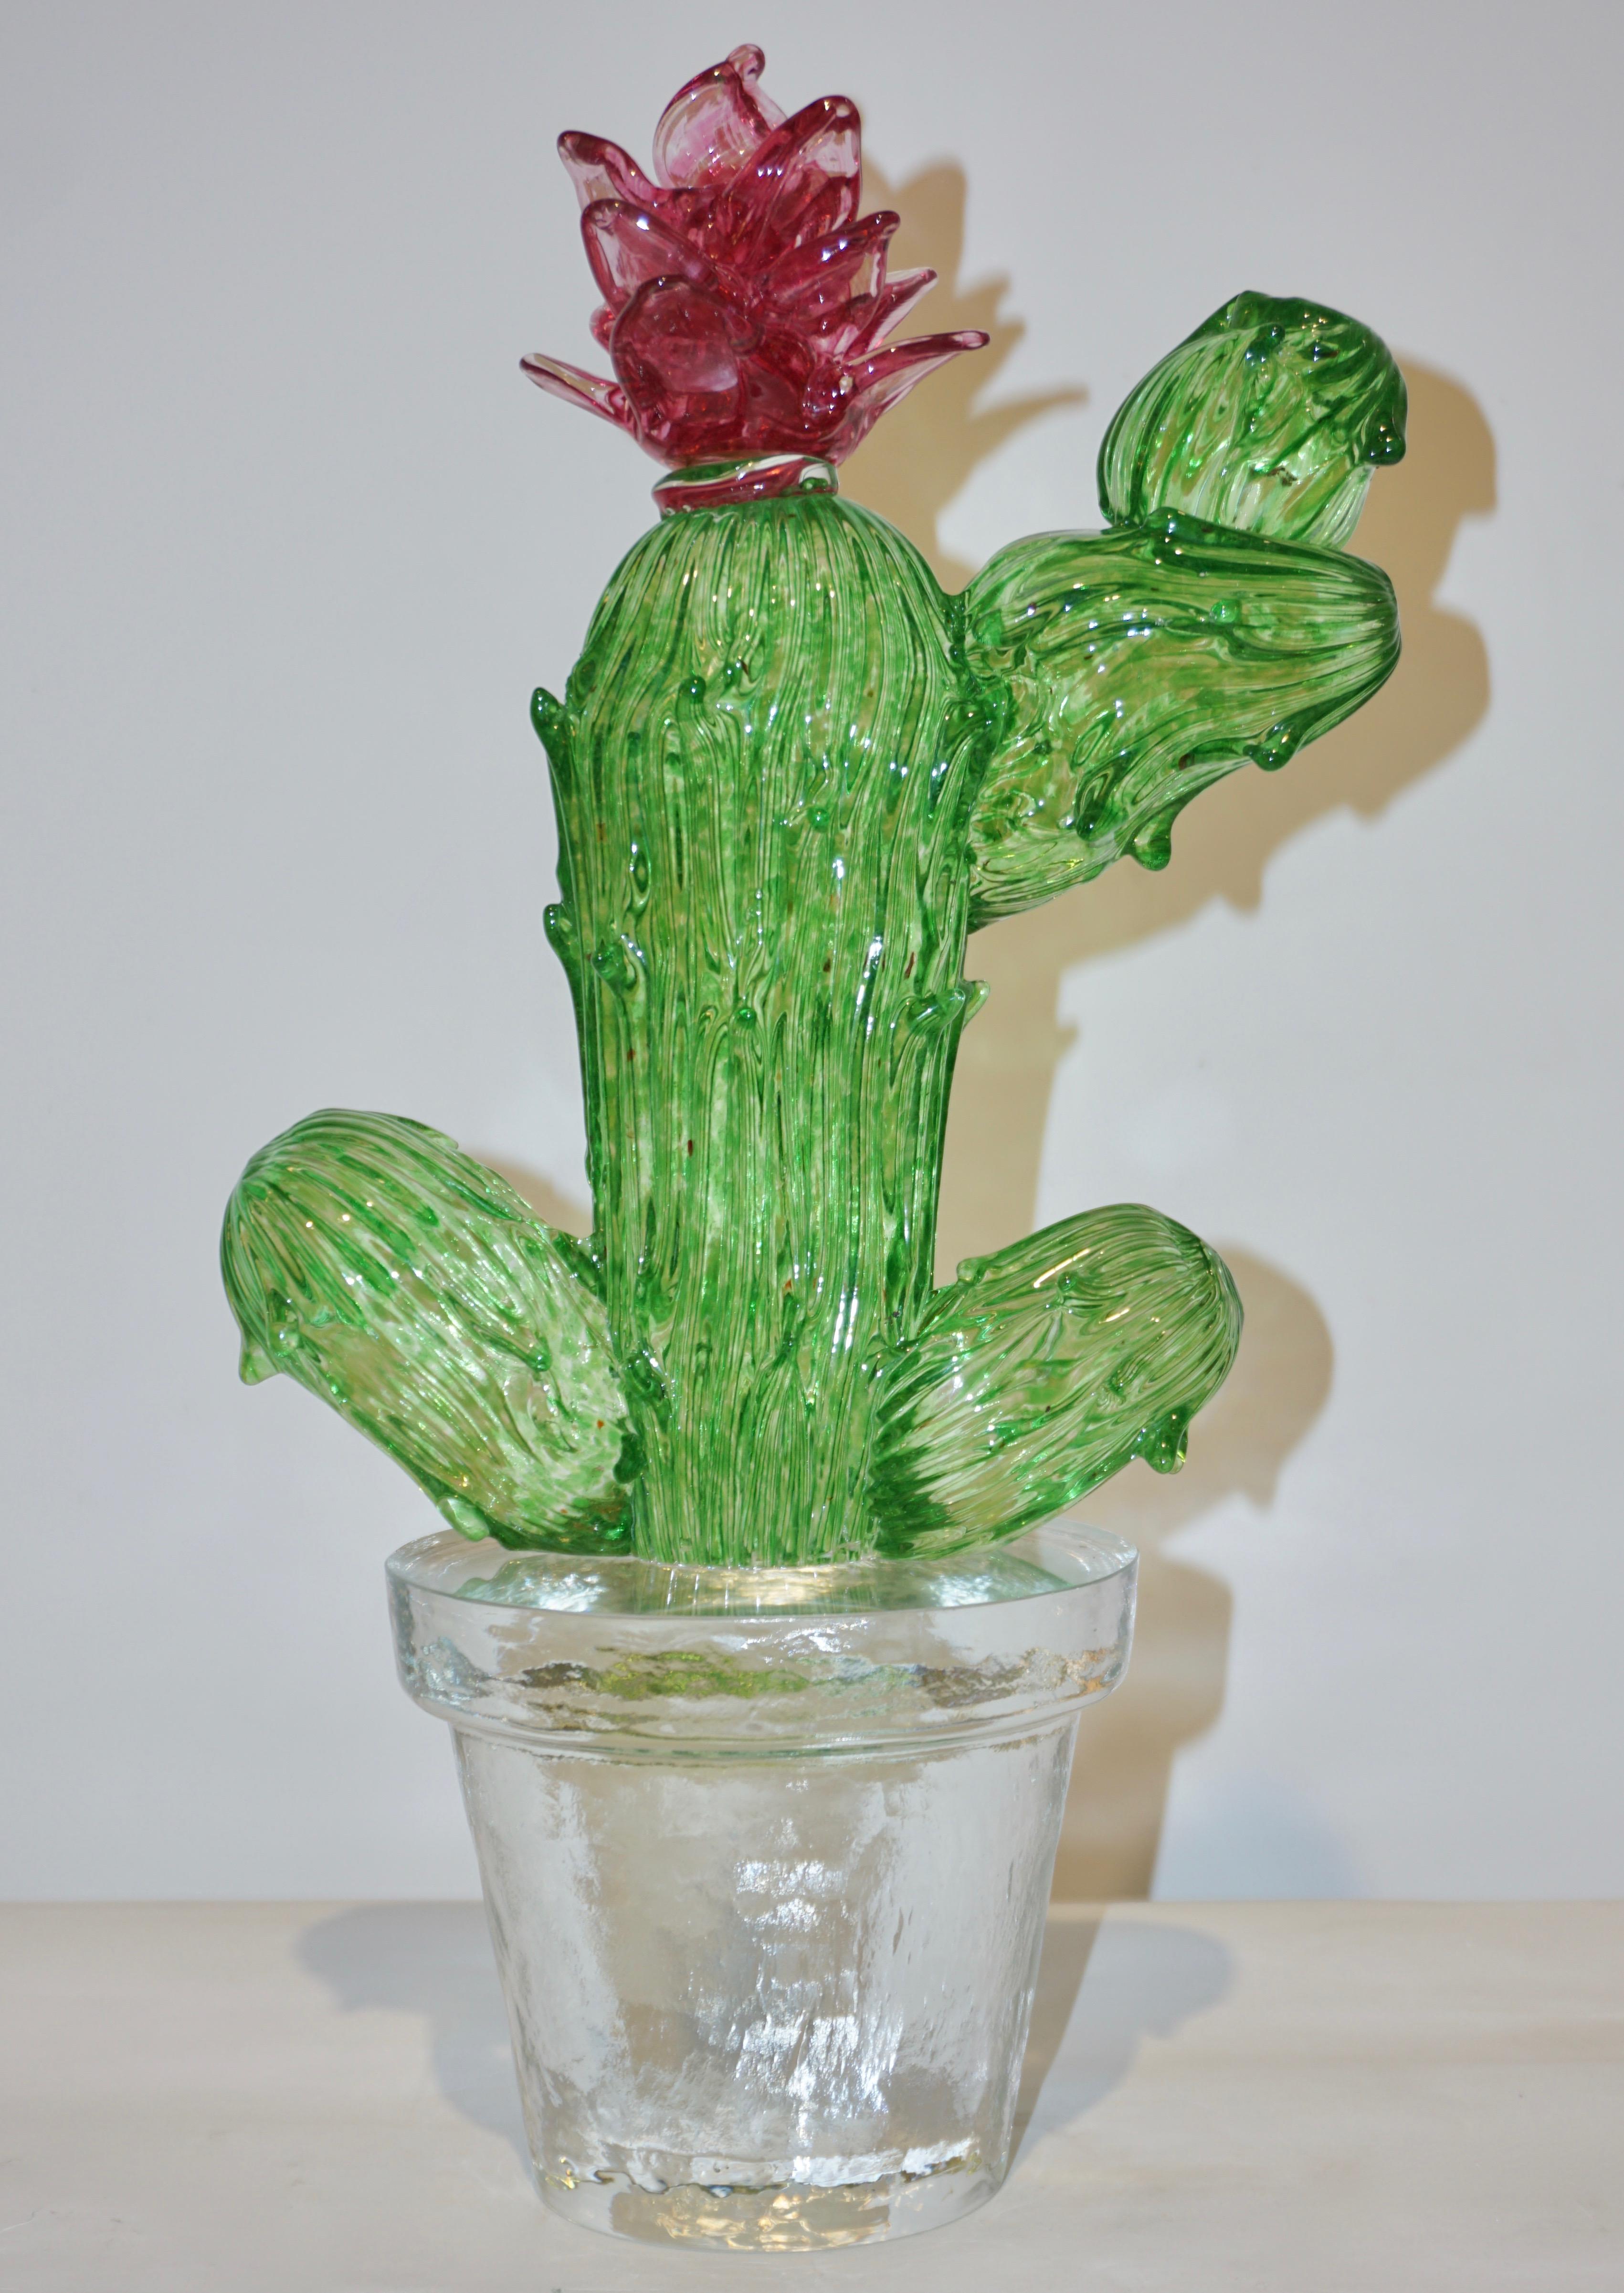 Organic Modern Formia Marta Marzotto Vintage Limited Edition Murano Glass Green Cactus Plant